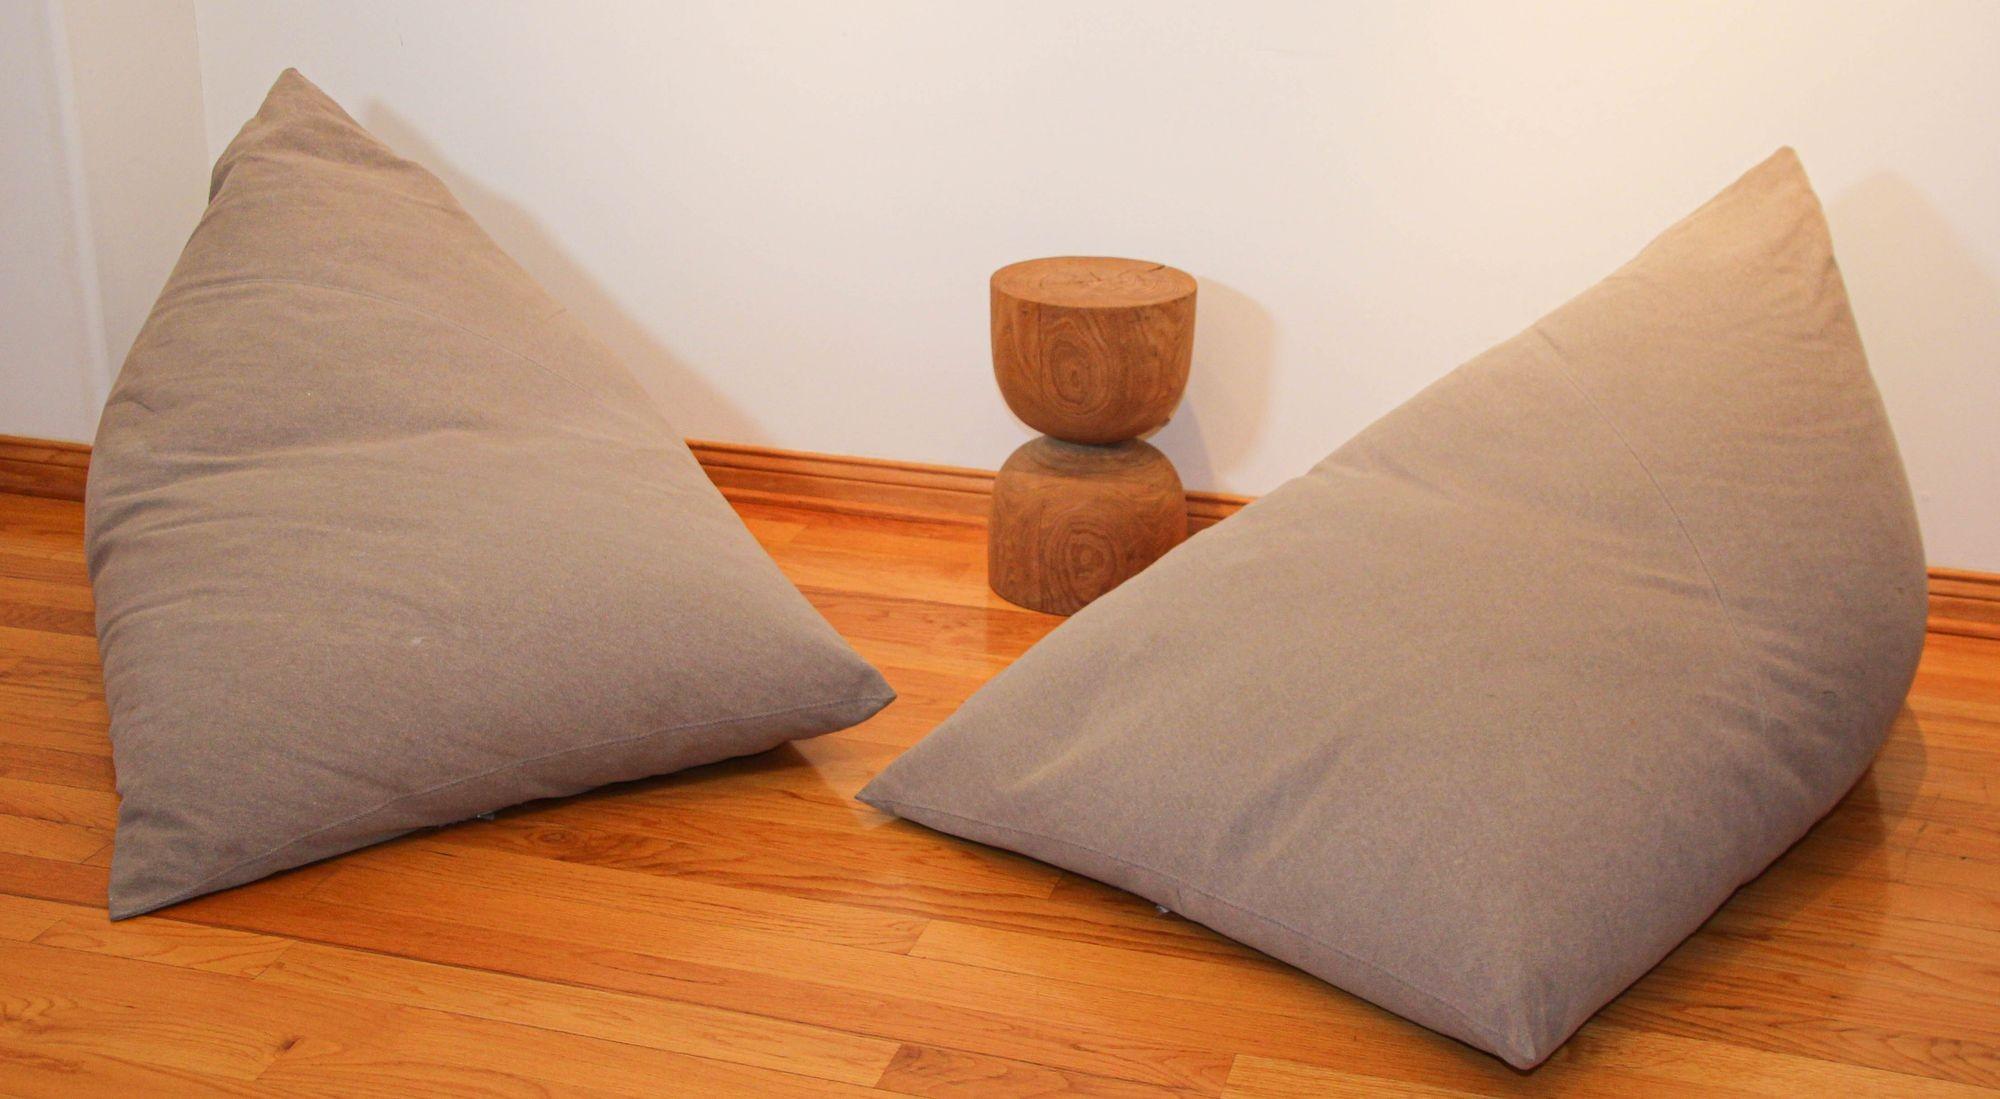 Ligne Roset Limited Edition Lounge Chairs Bean Bags.
Ligne Roset France with pure comfort and welcoming malleability, organic modernism lounge chairs and anti-form modernism beanbags, ergonomic design making the pieces both visually attractive and